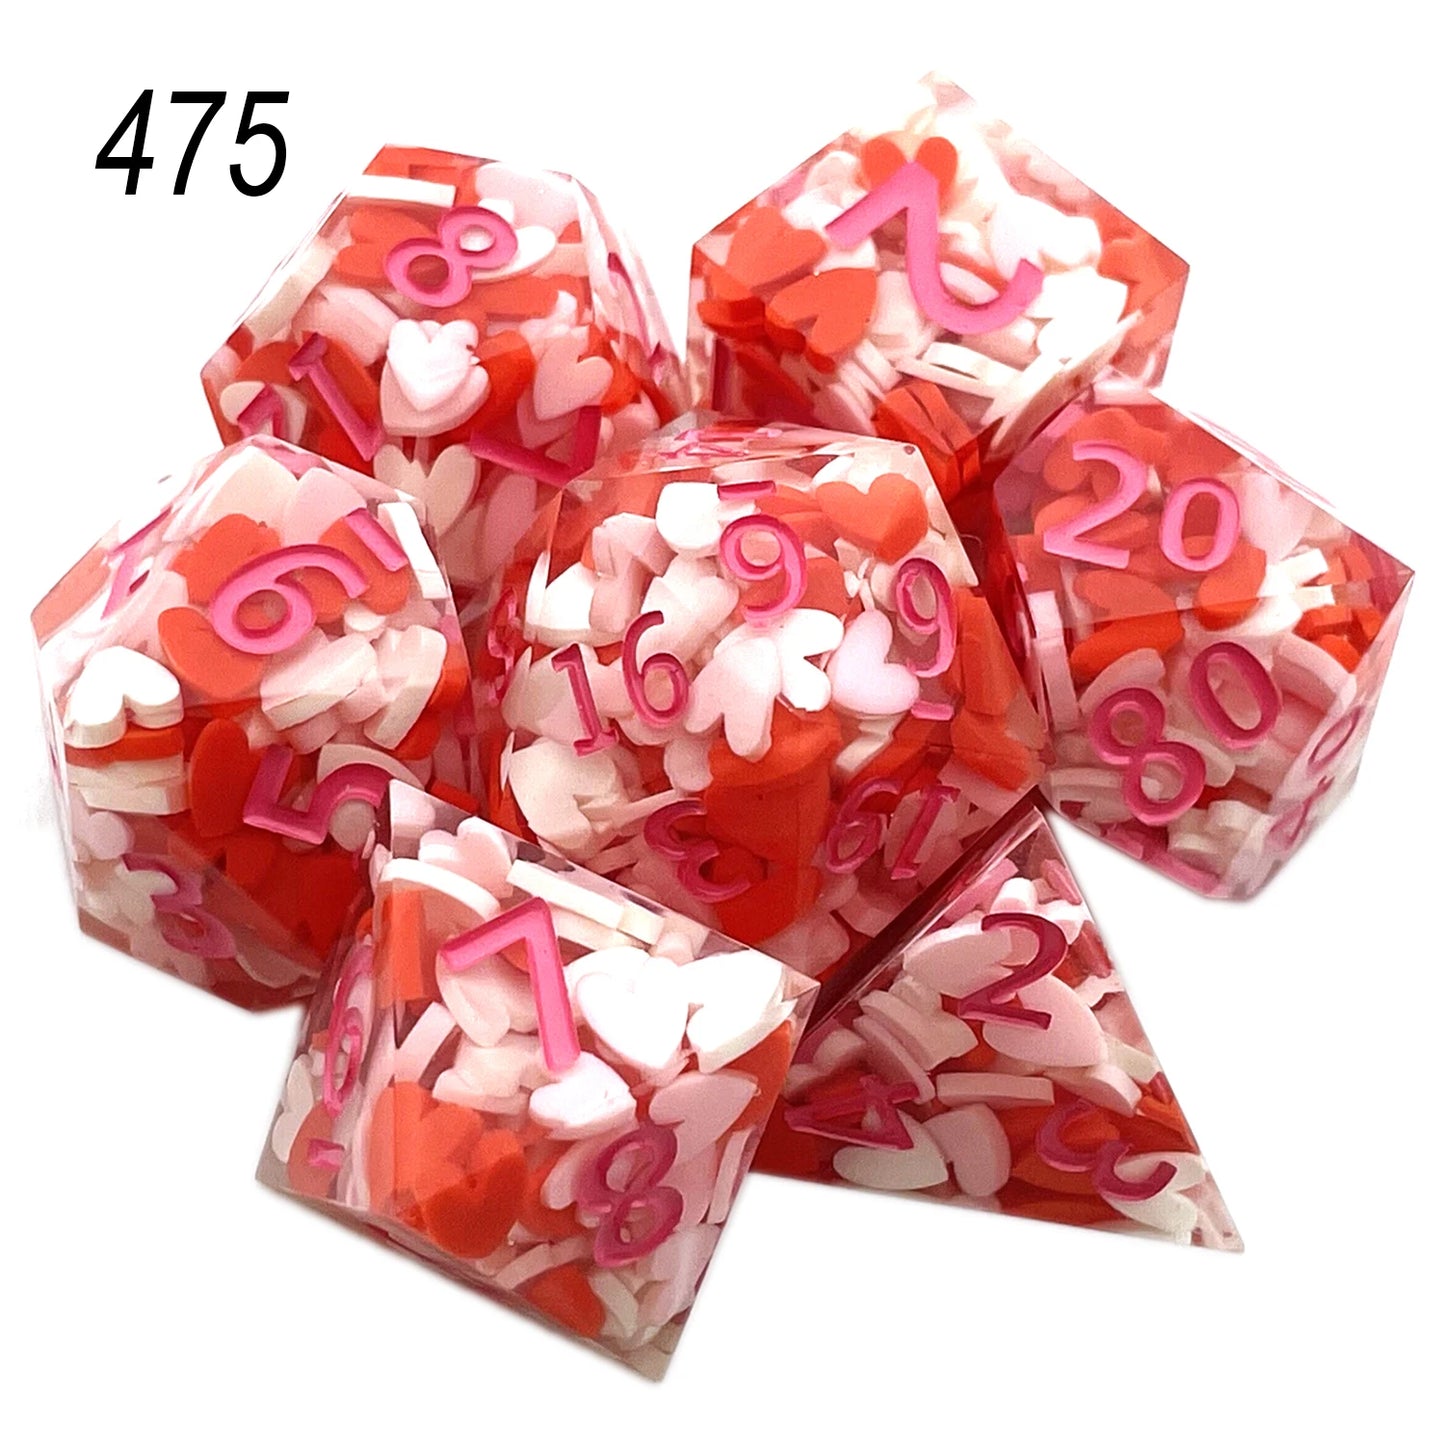 2023 Resin Dice 7PCs Dnd Set Solid Polyhedral D&D Dice DND For Role Playing Rpg Rol Pathfinder Board Game Dragon Scale Gifts 475